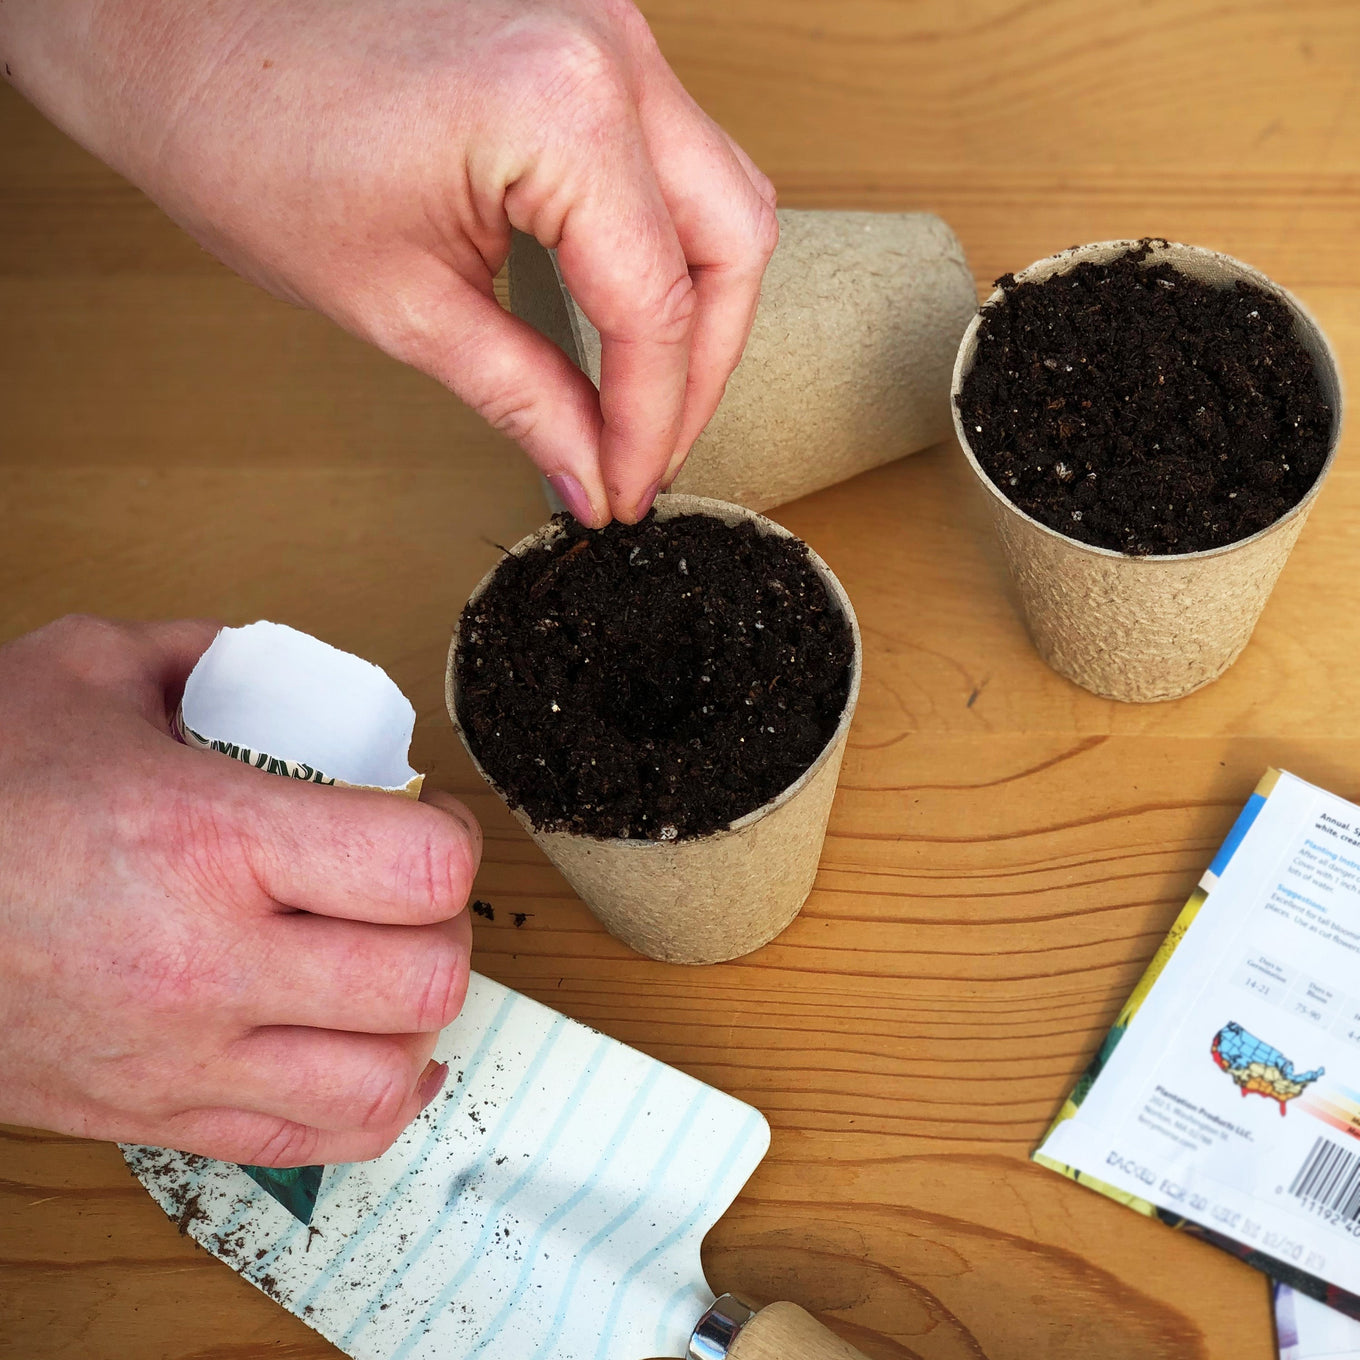 Start your mary washington asparagus seeds in biodegradable peat pots or paper pots.